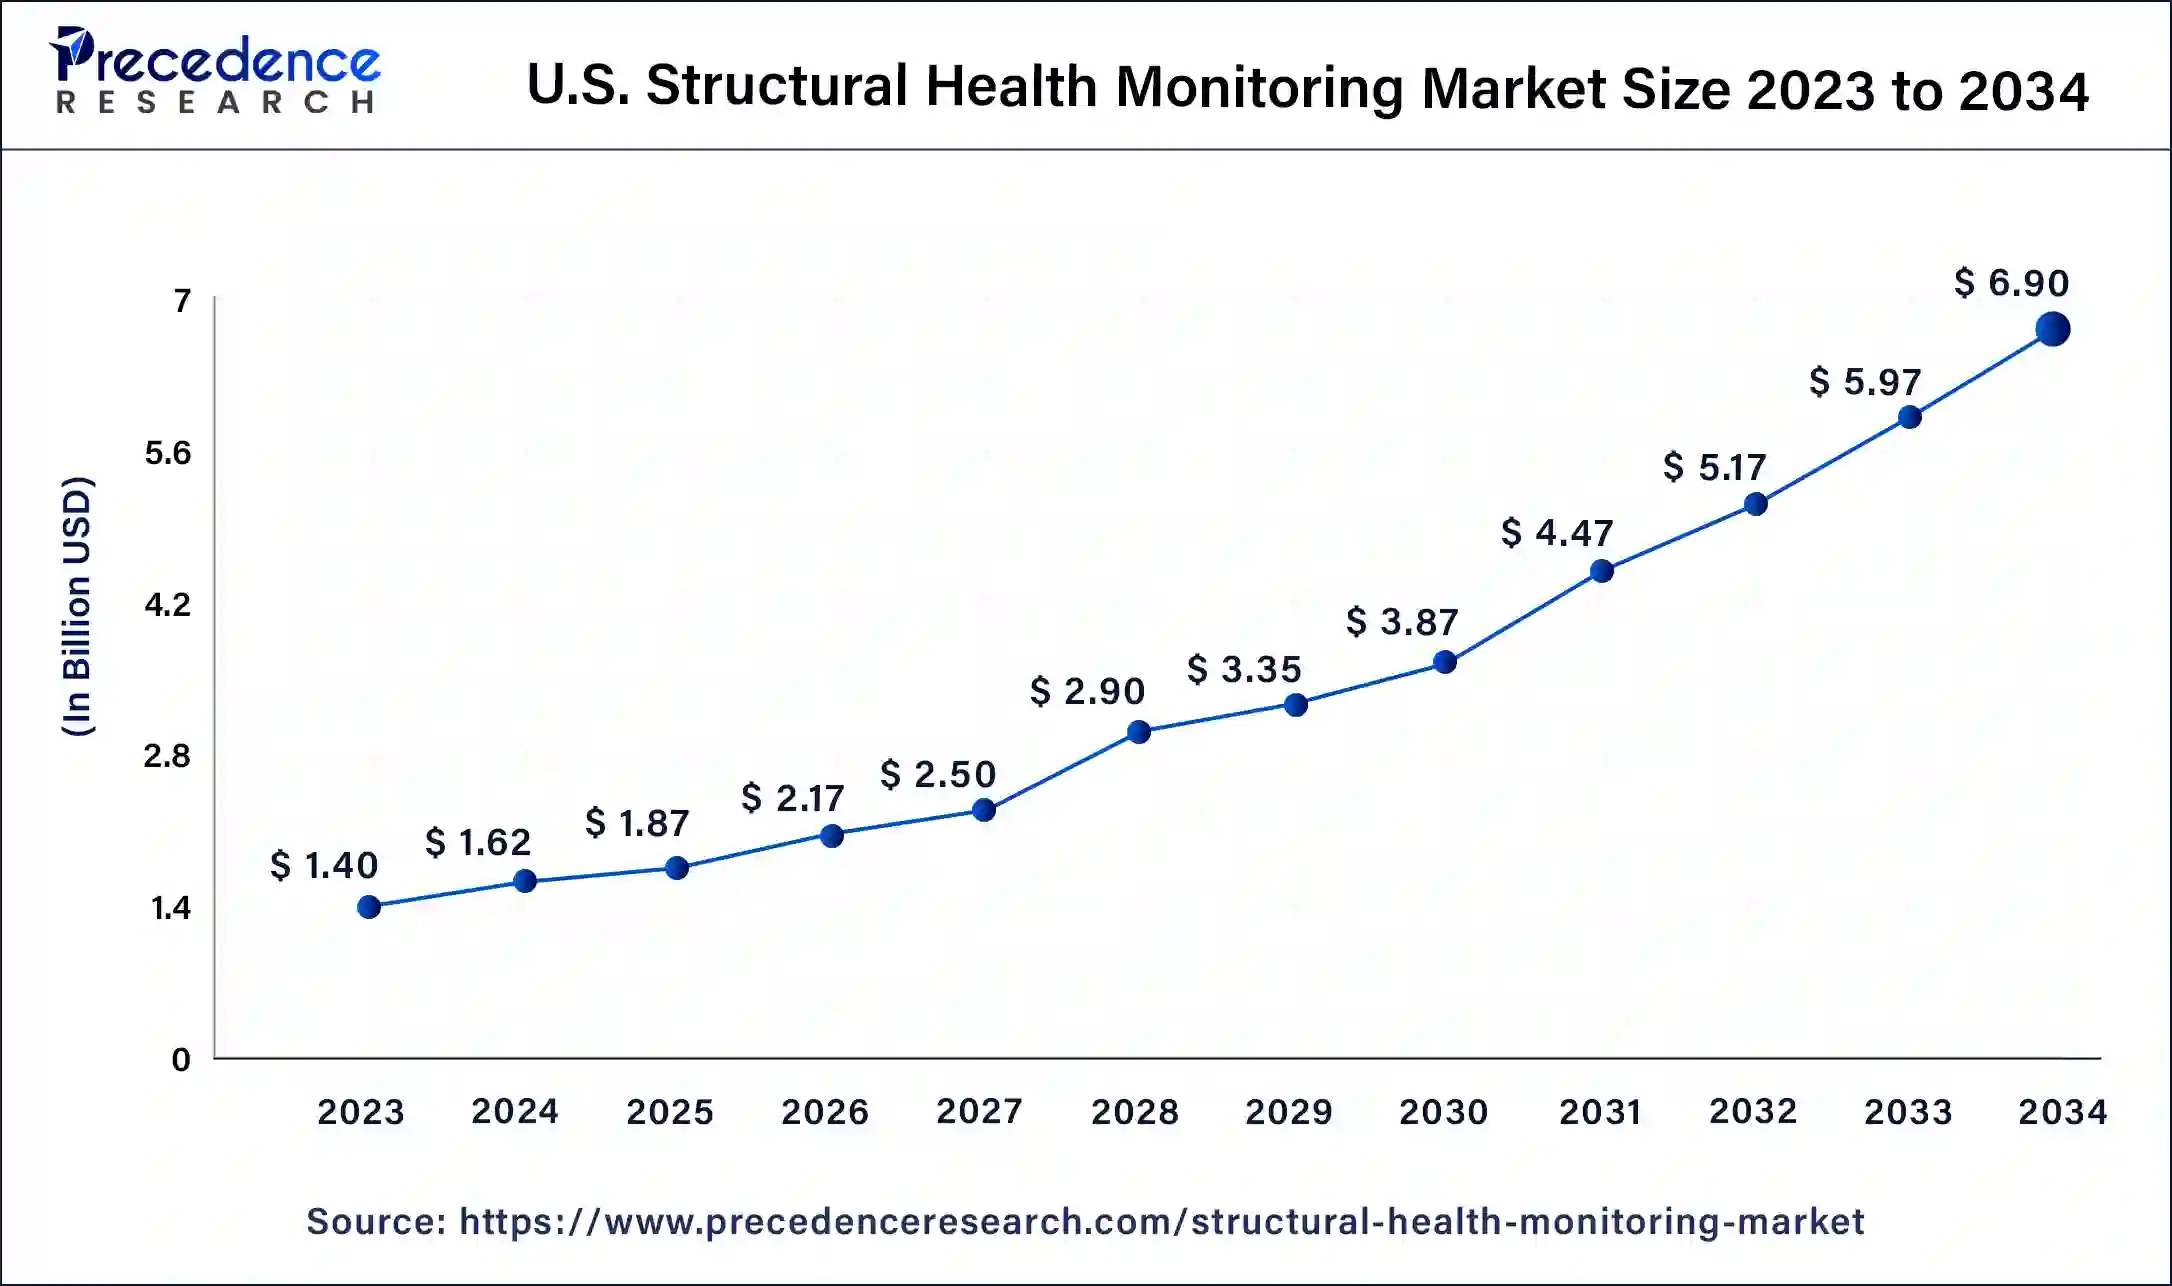 U.S. Structural Health Monitoring Market Size 2024 to 2034